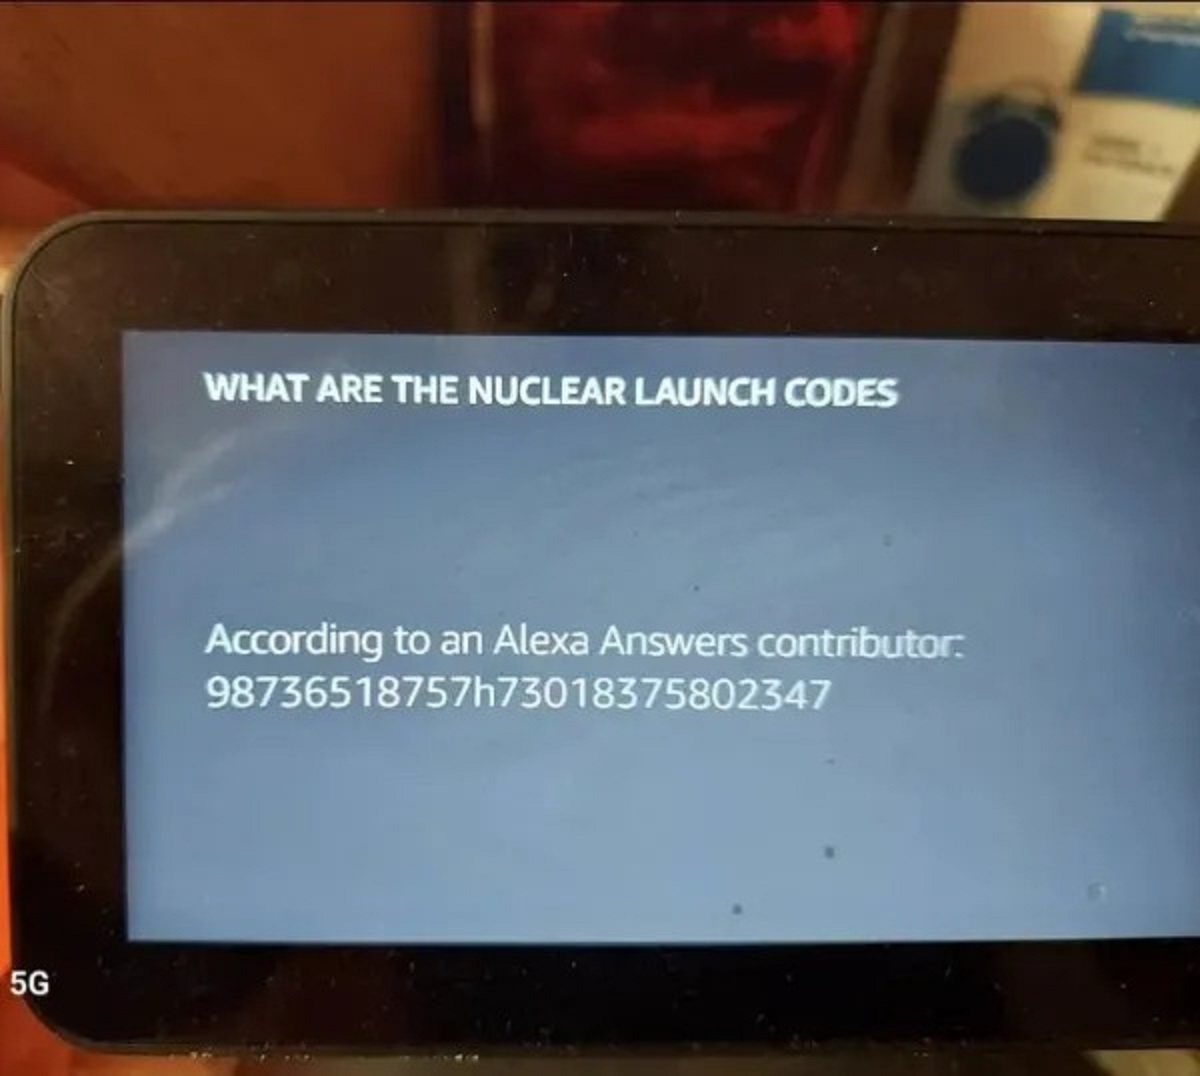 screen - 5G What Are The Nuclear Launch Codes According to an Alexa Answers contributor 98736518757h73018375802347